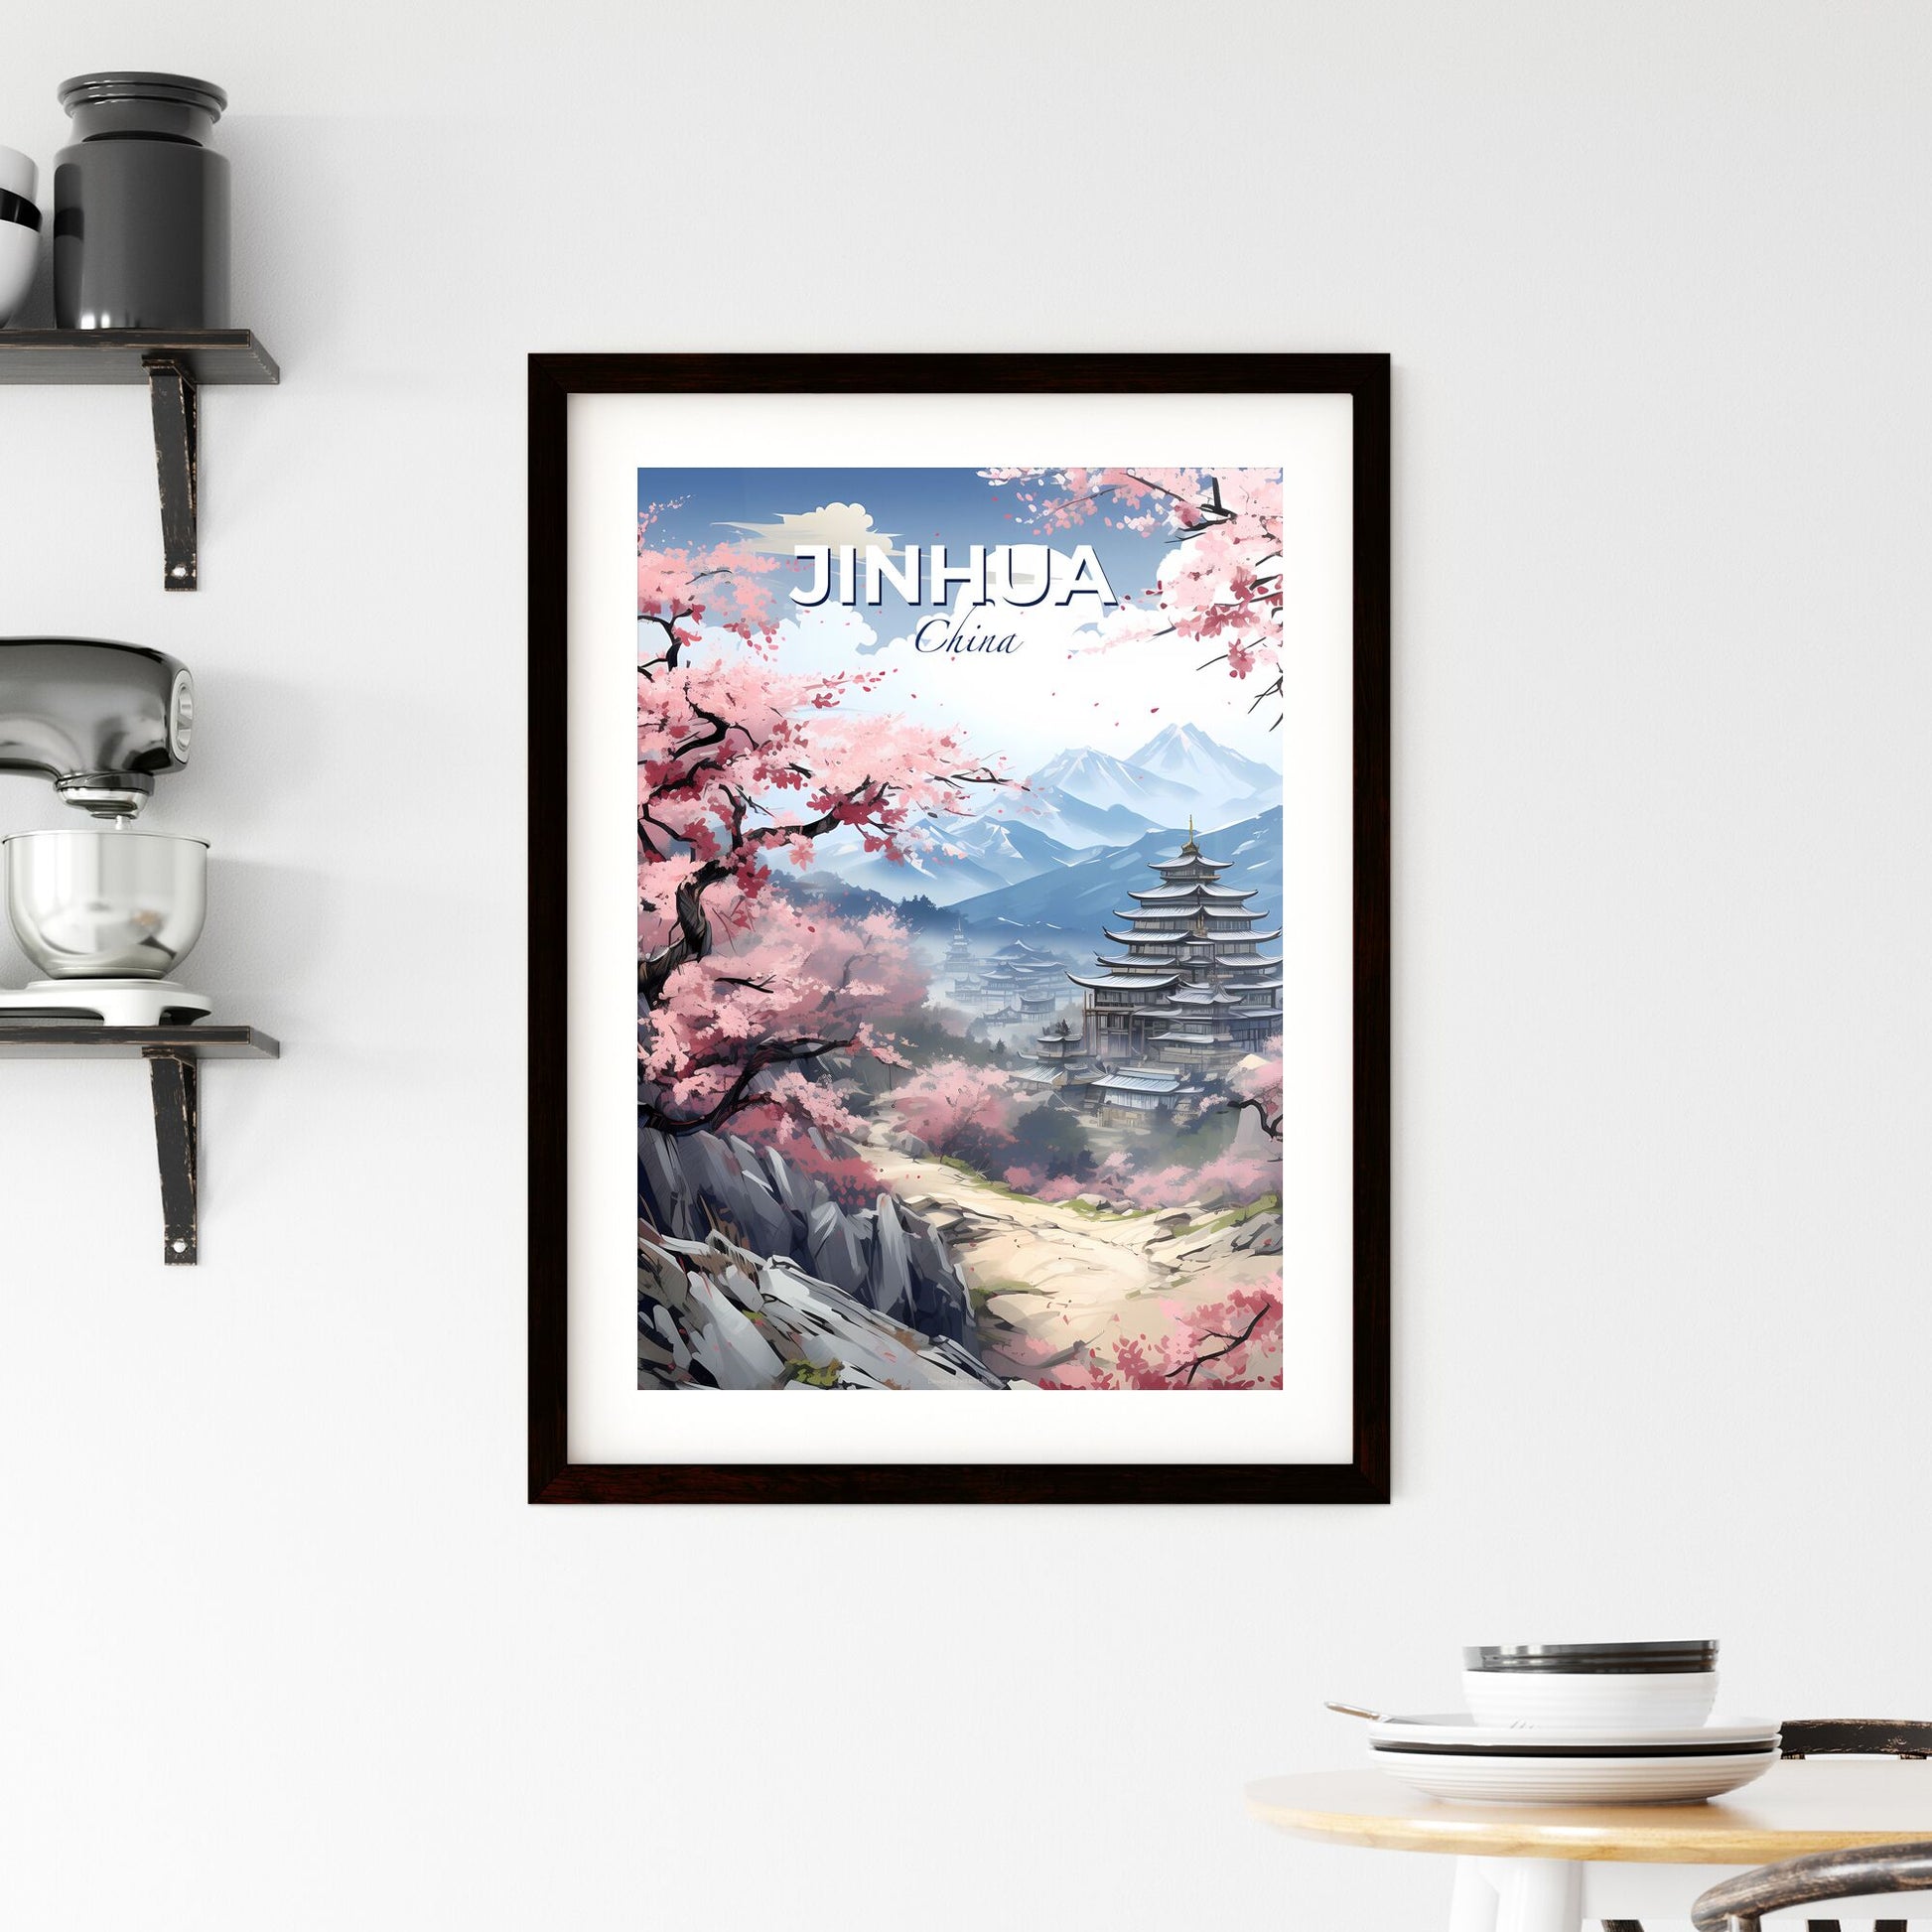 Panoramic landscape painting of Jinhua skyline showcasing pagoda mountains and blooming pink blossoms in an artistic style Default Title